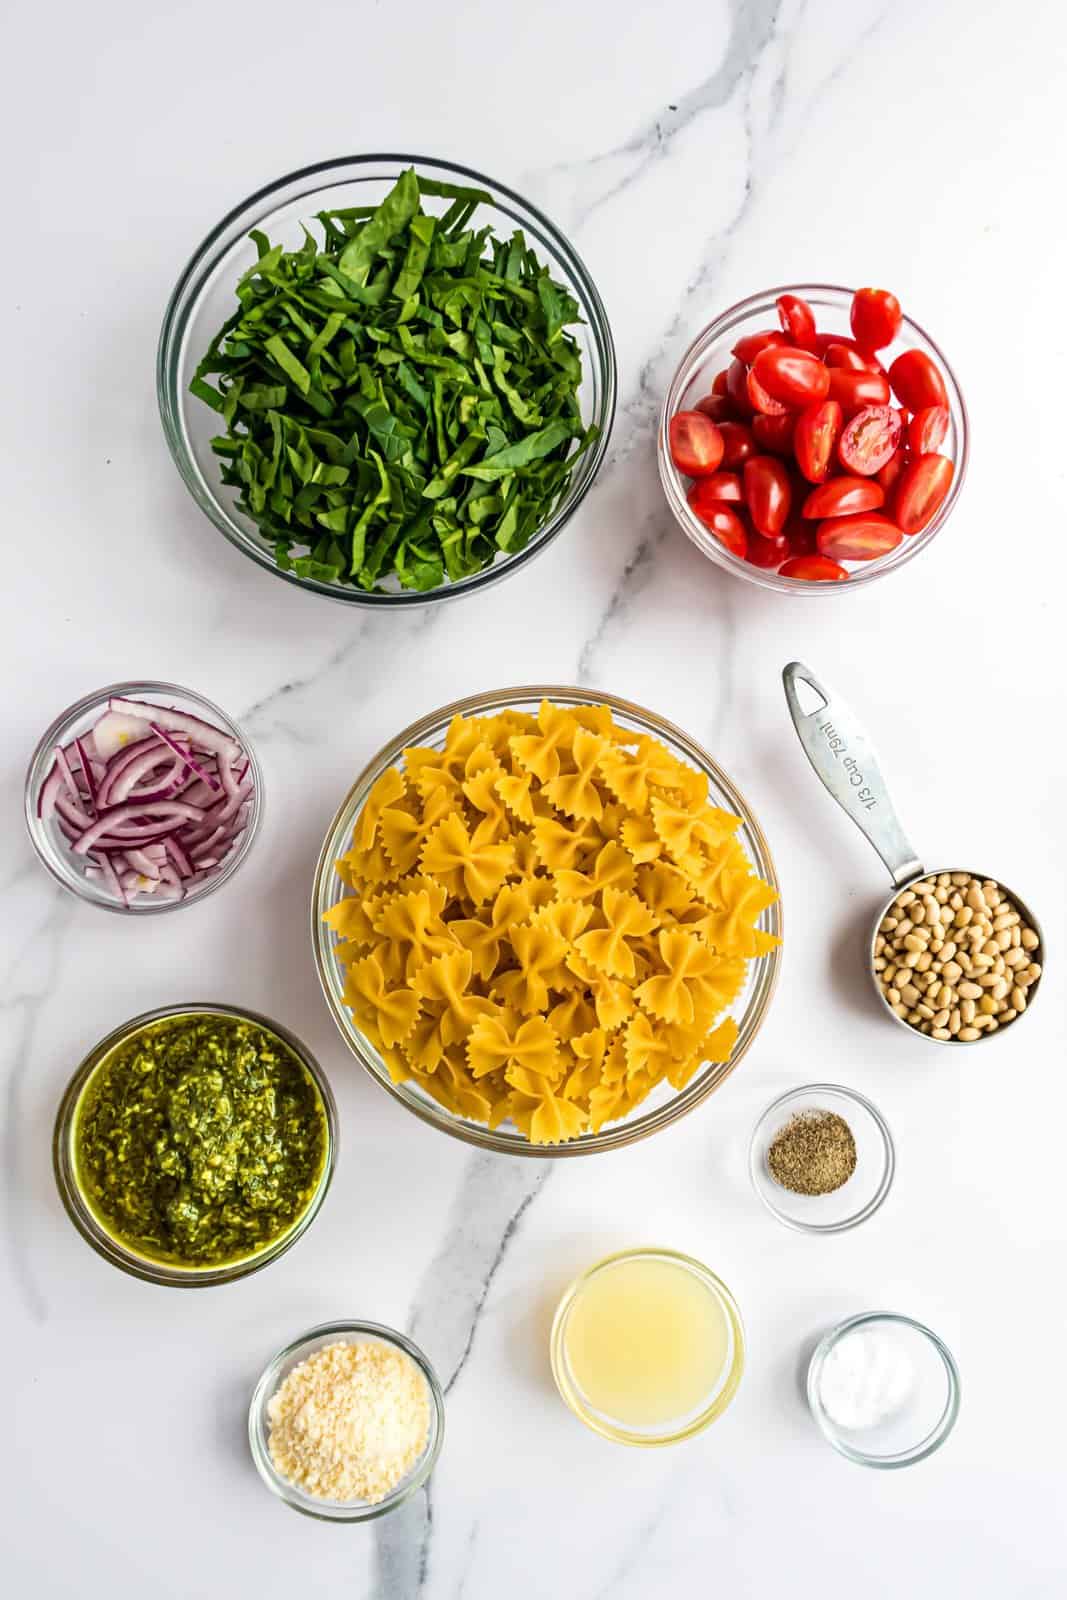 Pine nuts, bow tie pasts, pesto sauce, lemon juice, kosher salt, black pepper, fresh spinach, cherry or grape tomatoes, red onion, and grated or shaved parmesan cheese.